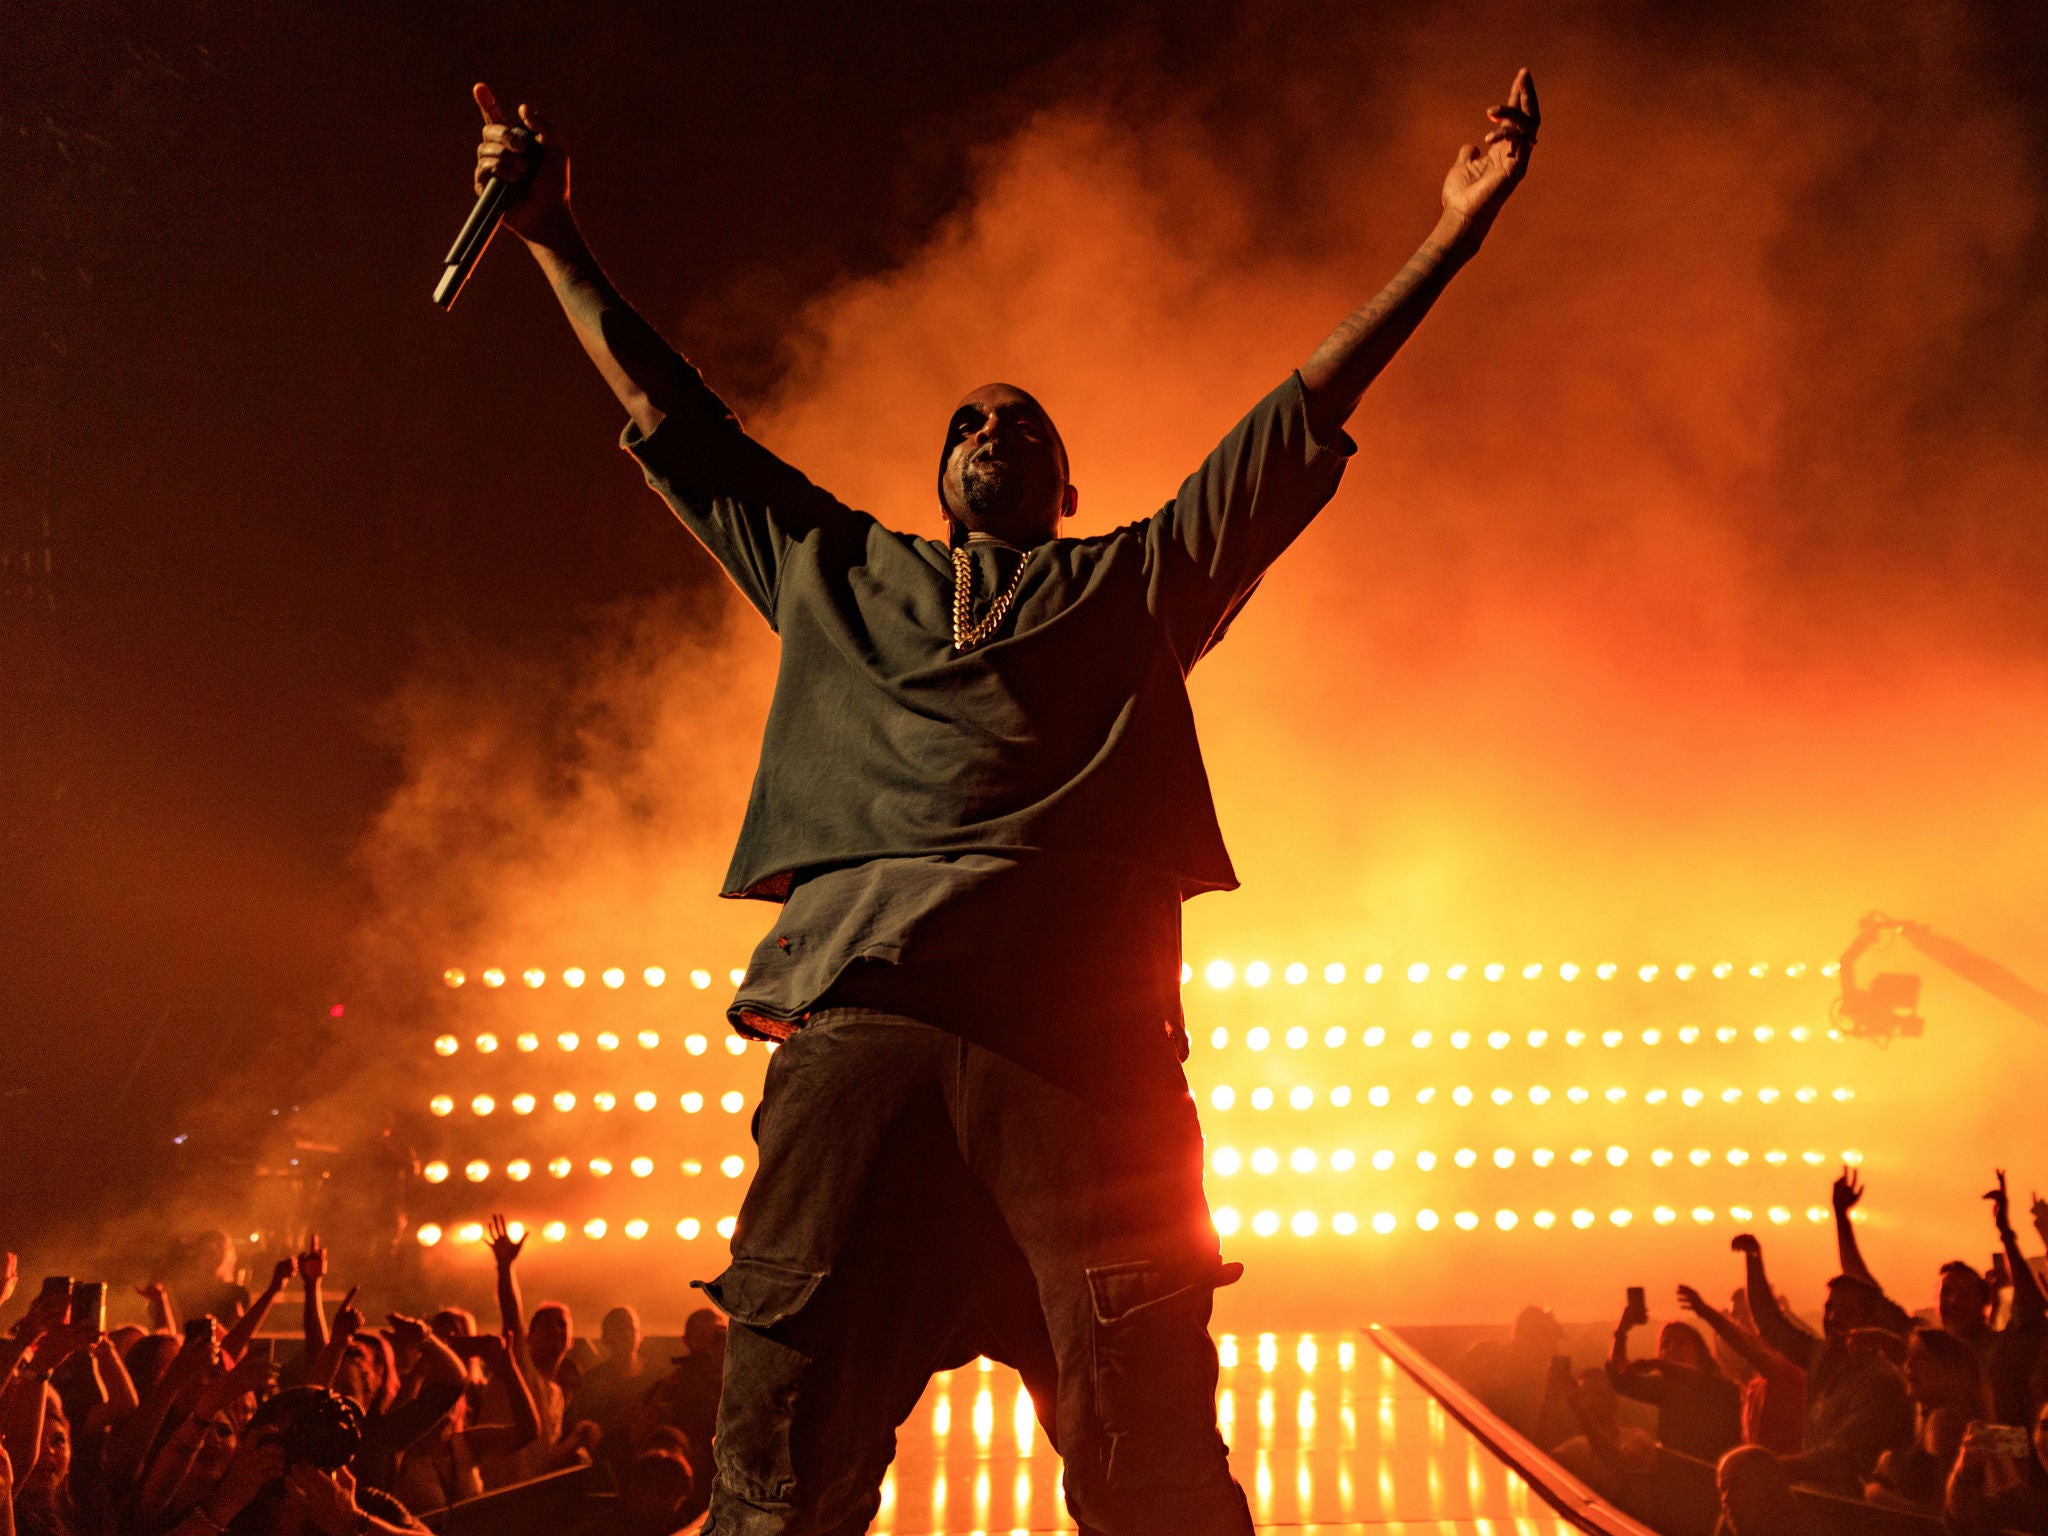 Kanye headlined Glastonbury in 2015 despite a petition calling for organisers to 'get a rock band instead'